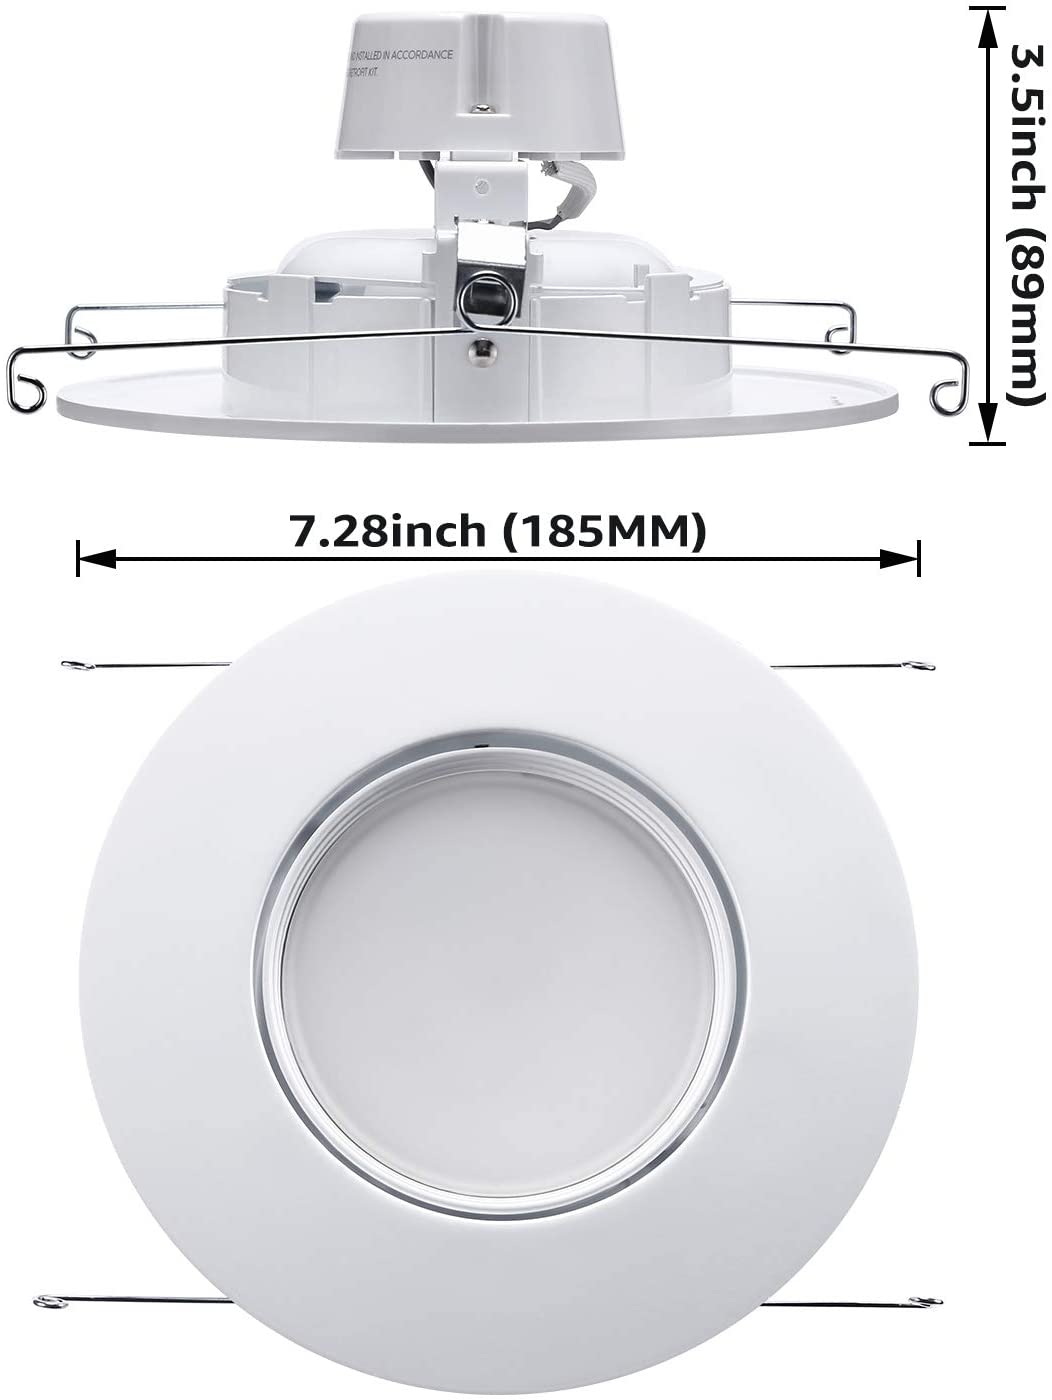 TORCHSTAR 5/6 Inch Gimbal LED Retrofit Downlight, Adjustable Recessed  Ceiling Light, Dimmable, 5000K Daylight, Pack of